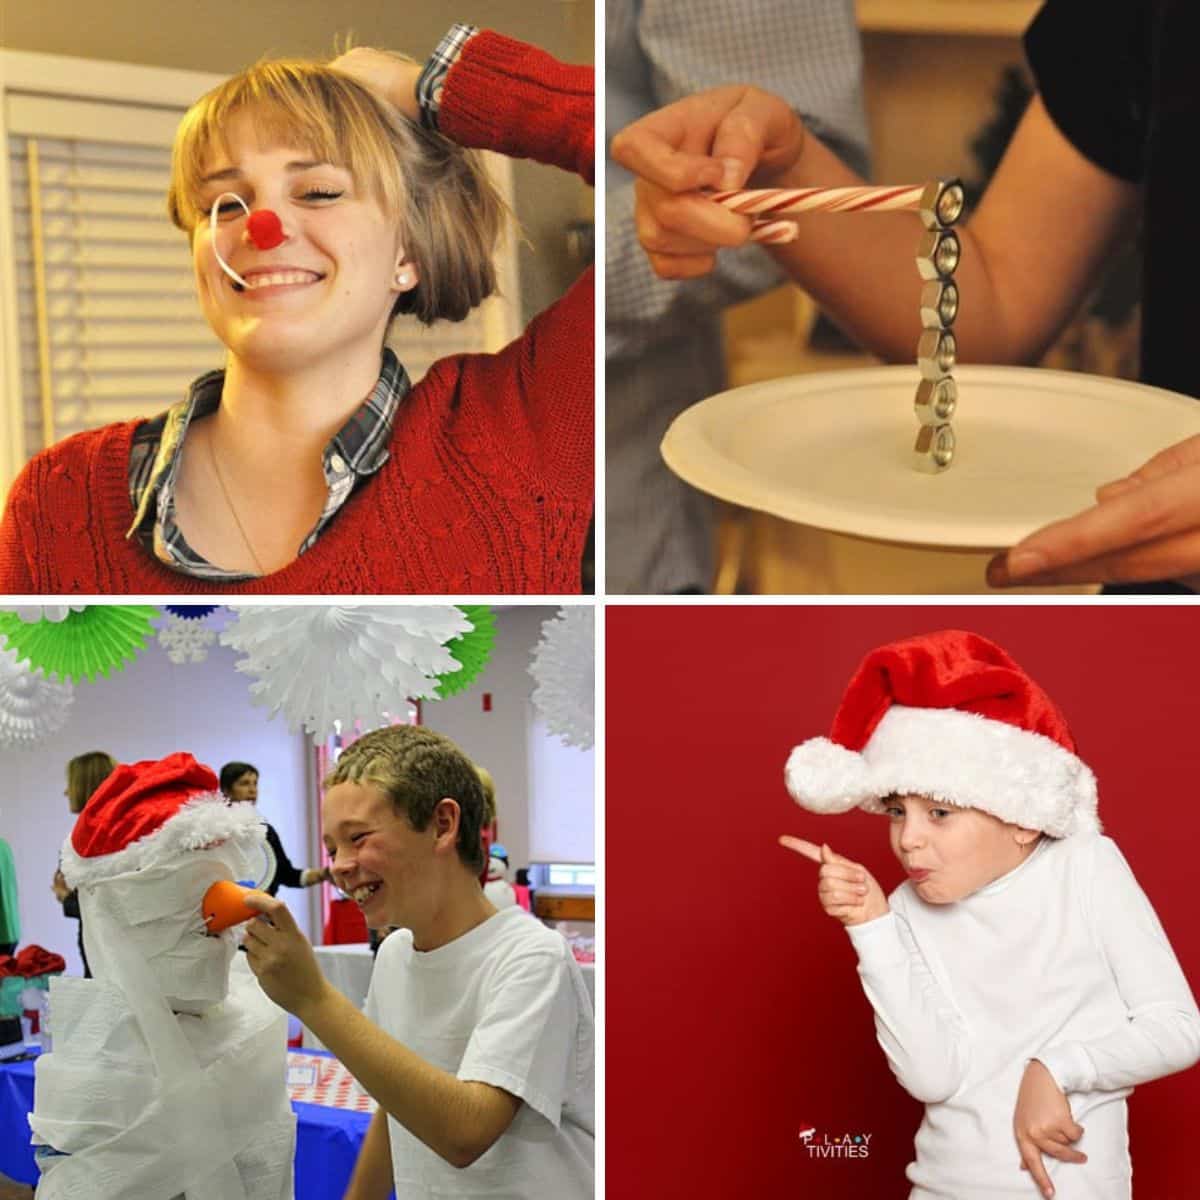 4 images of hilarious christmas games for families.